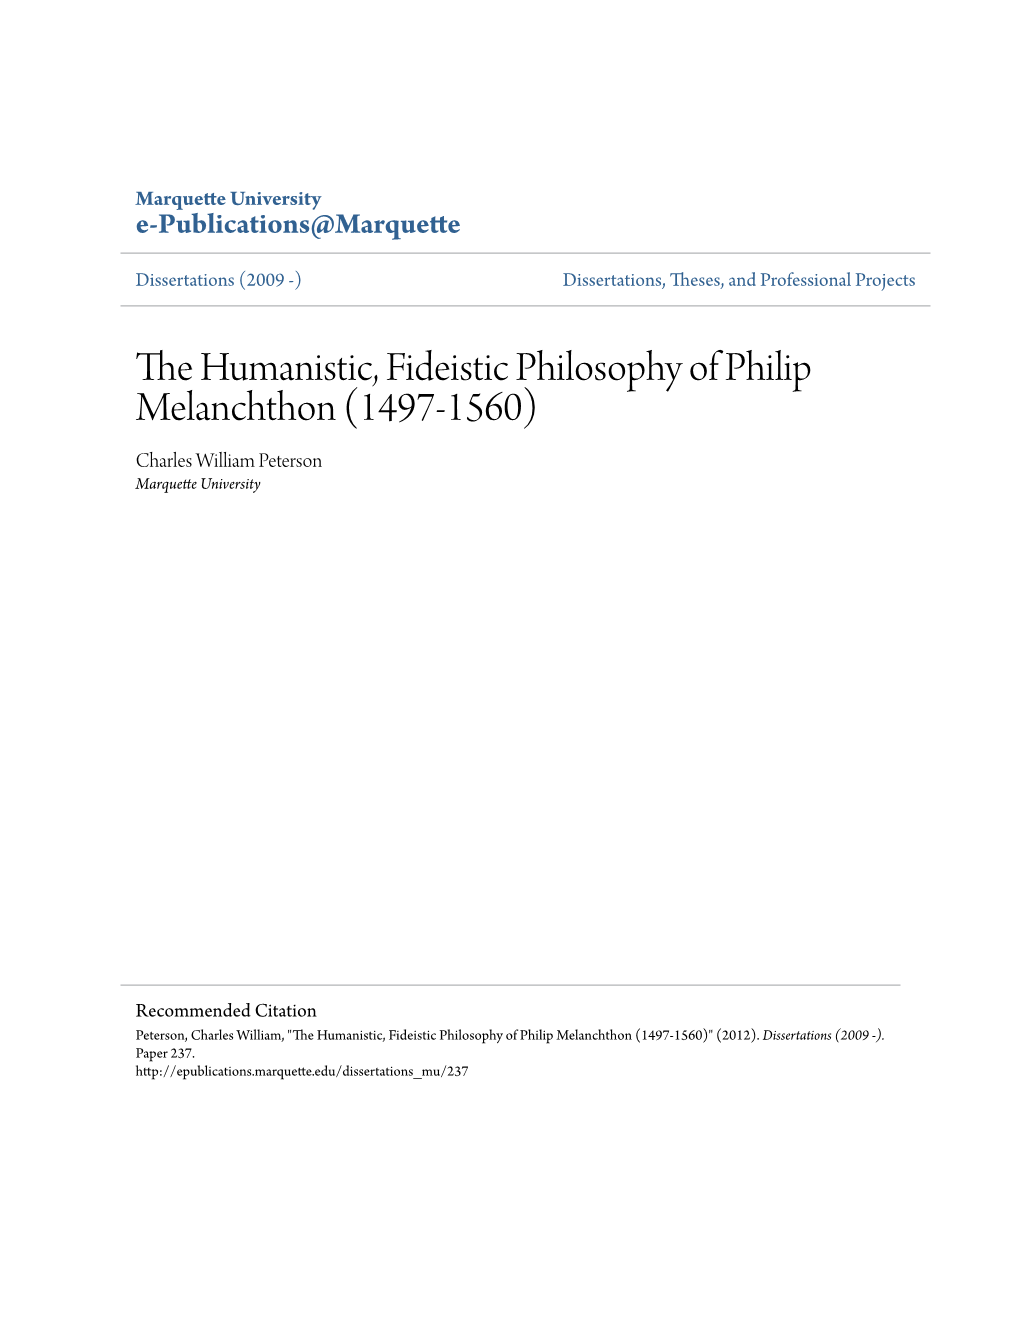 The Humanistic, Fideistic Philosophy of Philip Melanchthon (1497-1560)